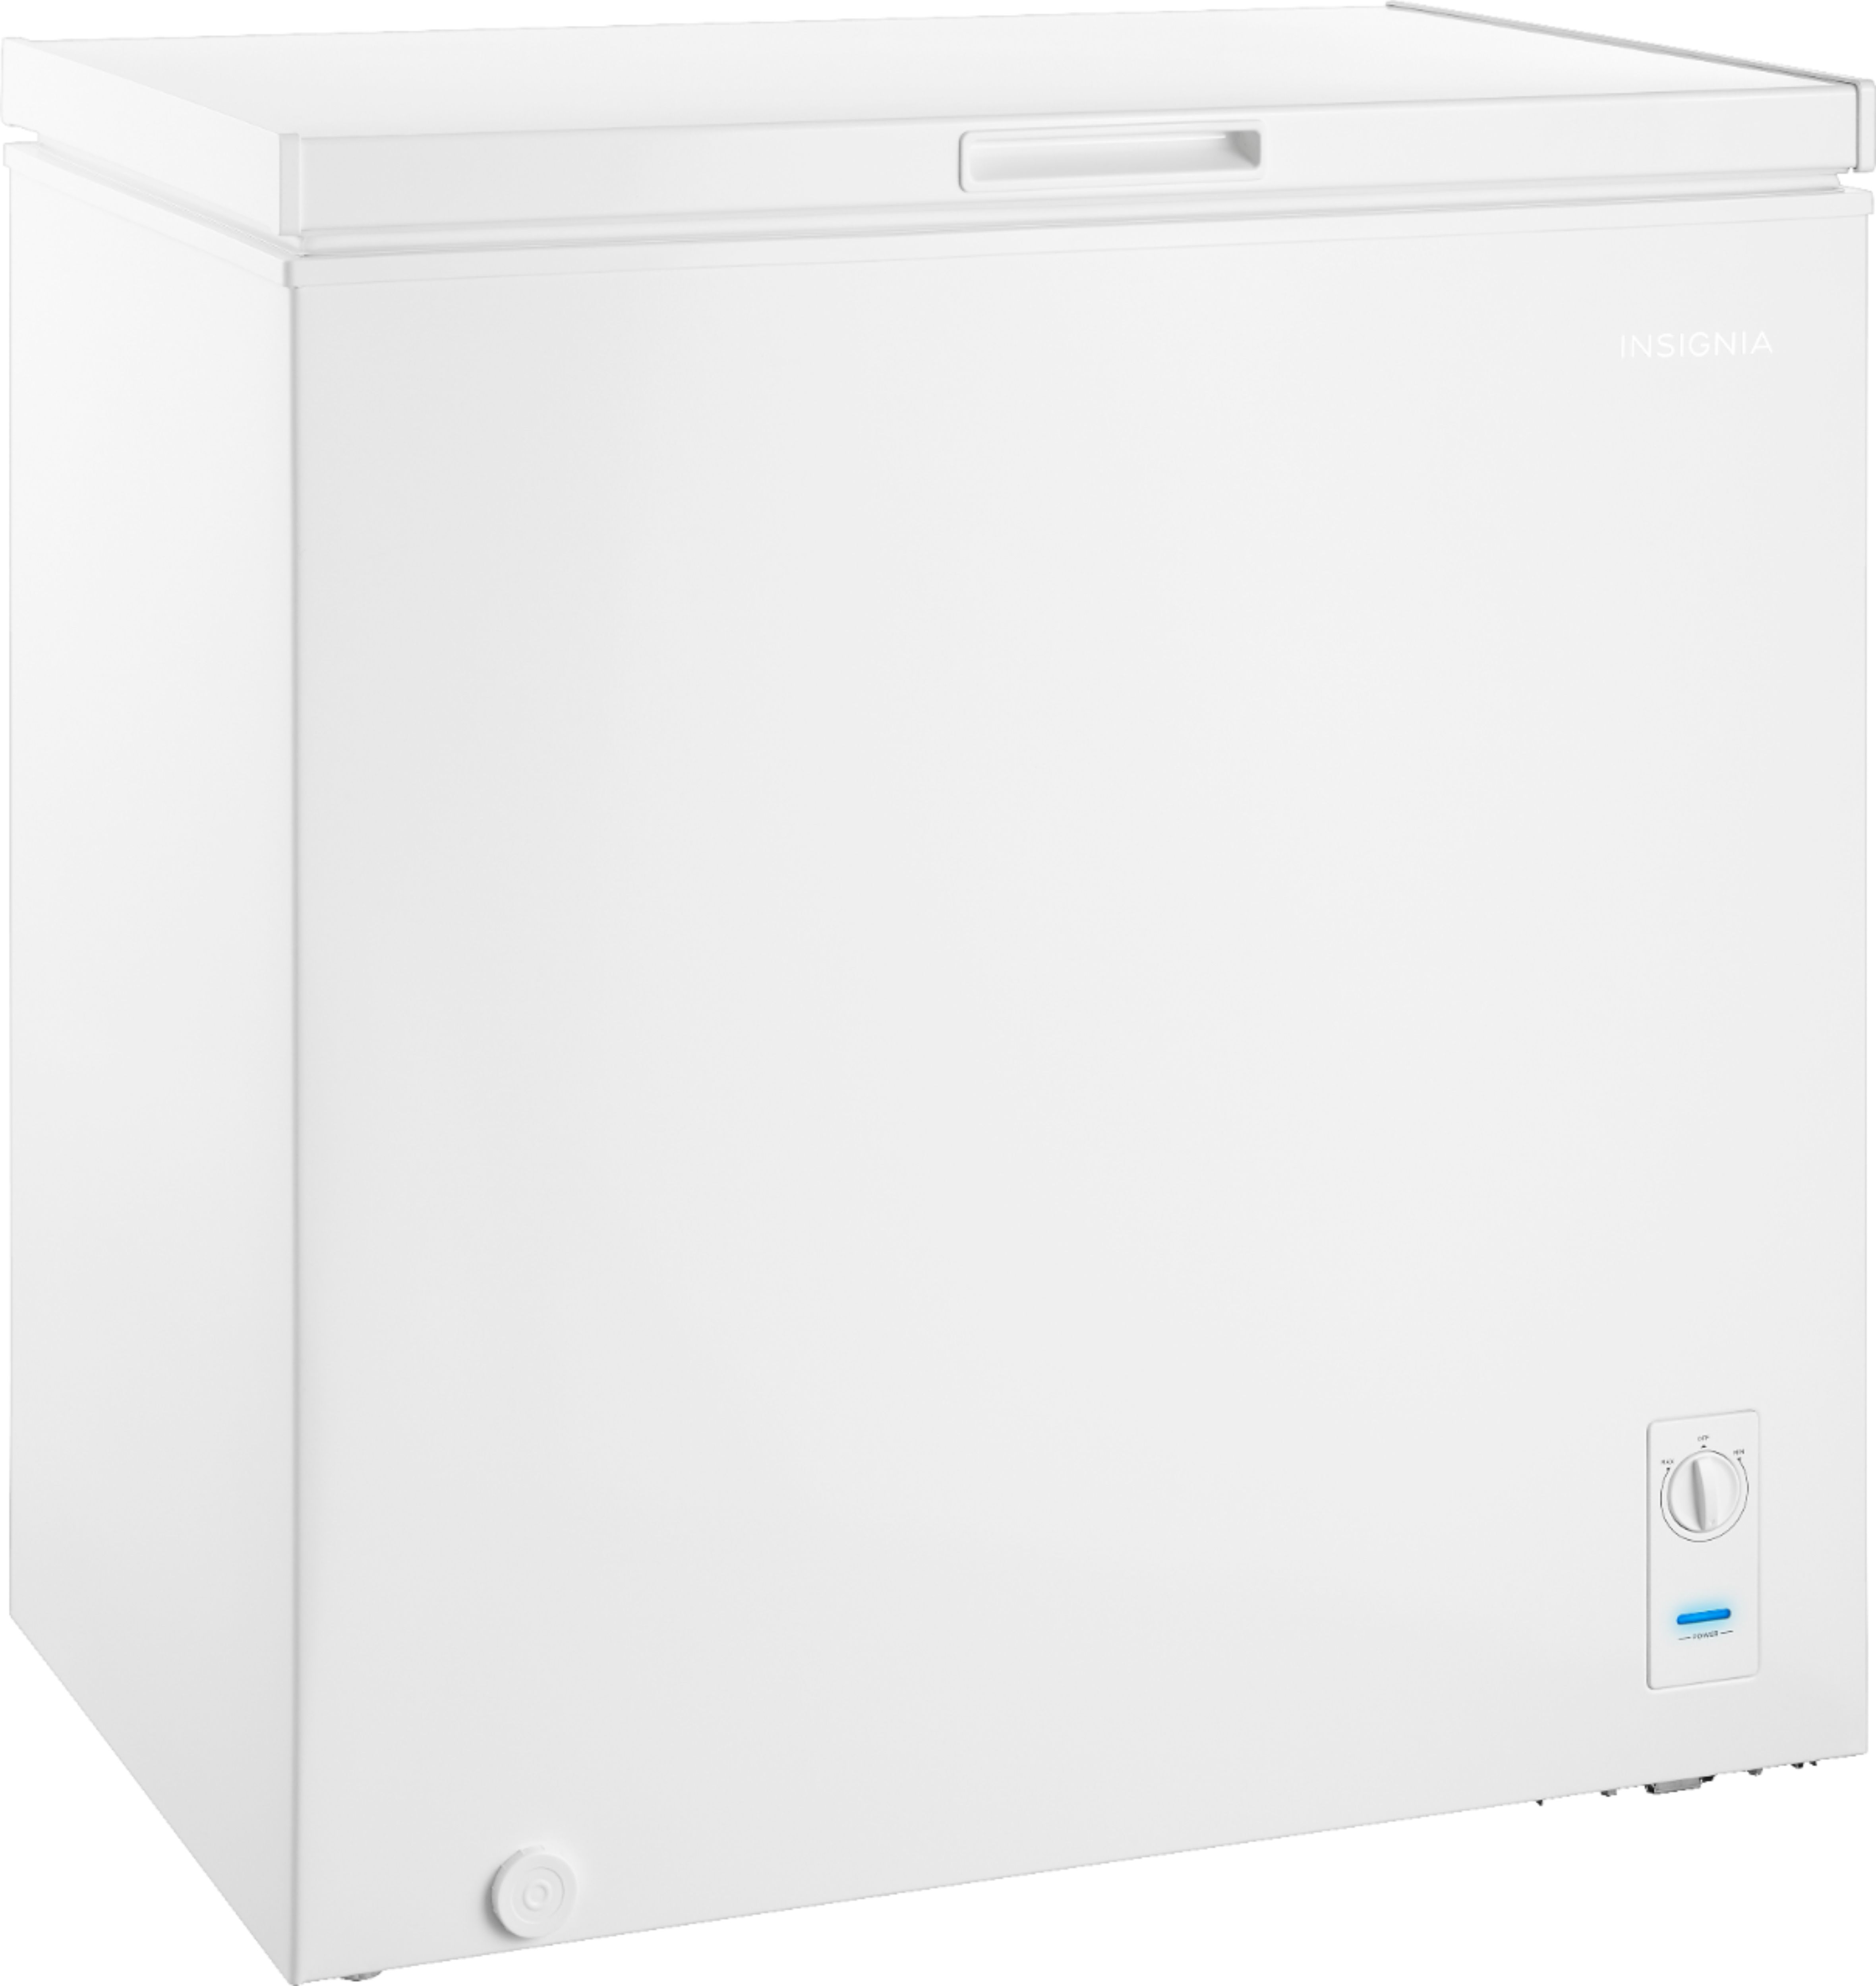 Angle View: Viking - Professional 5 Series Quiet Cool 19.2 Cu. Ft. Upright Freezer with Interior Light - Alluvial blue